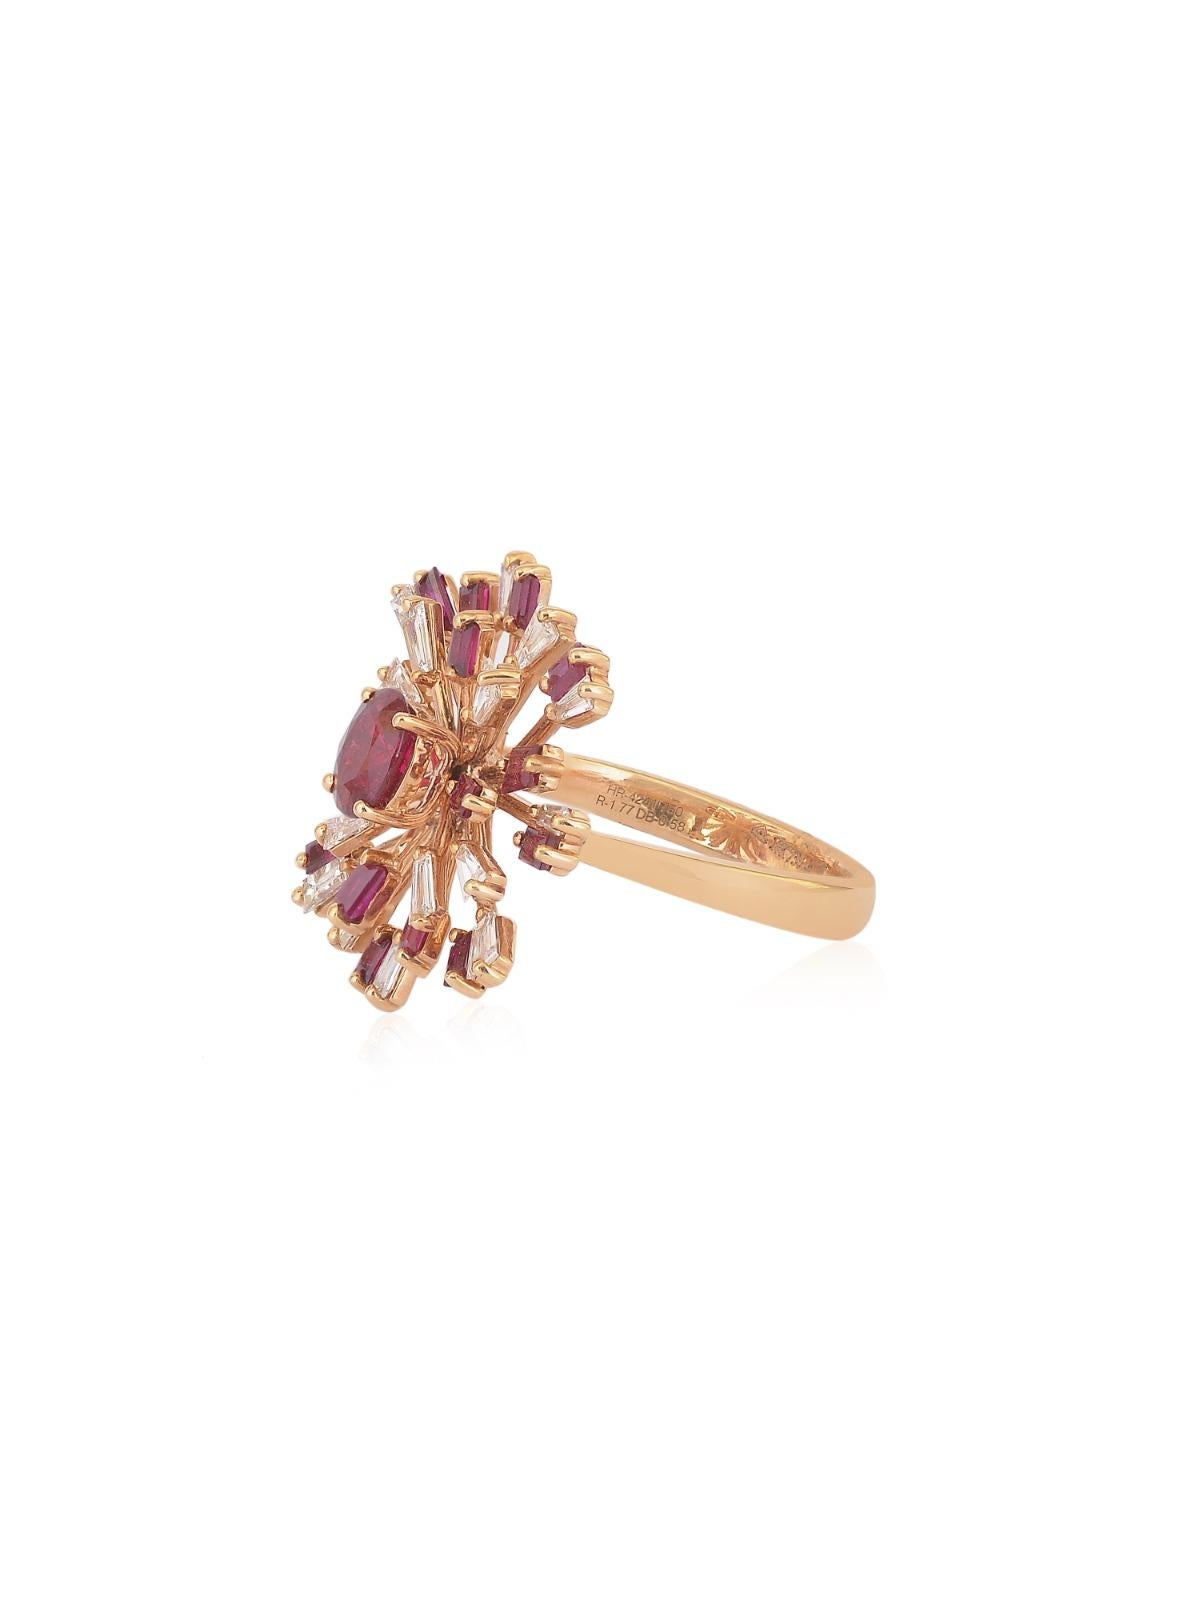 Oval Cut Ruby and Diamond Cocktail Ring in 18k Gold For Sale